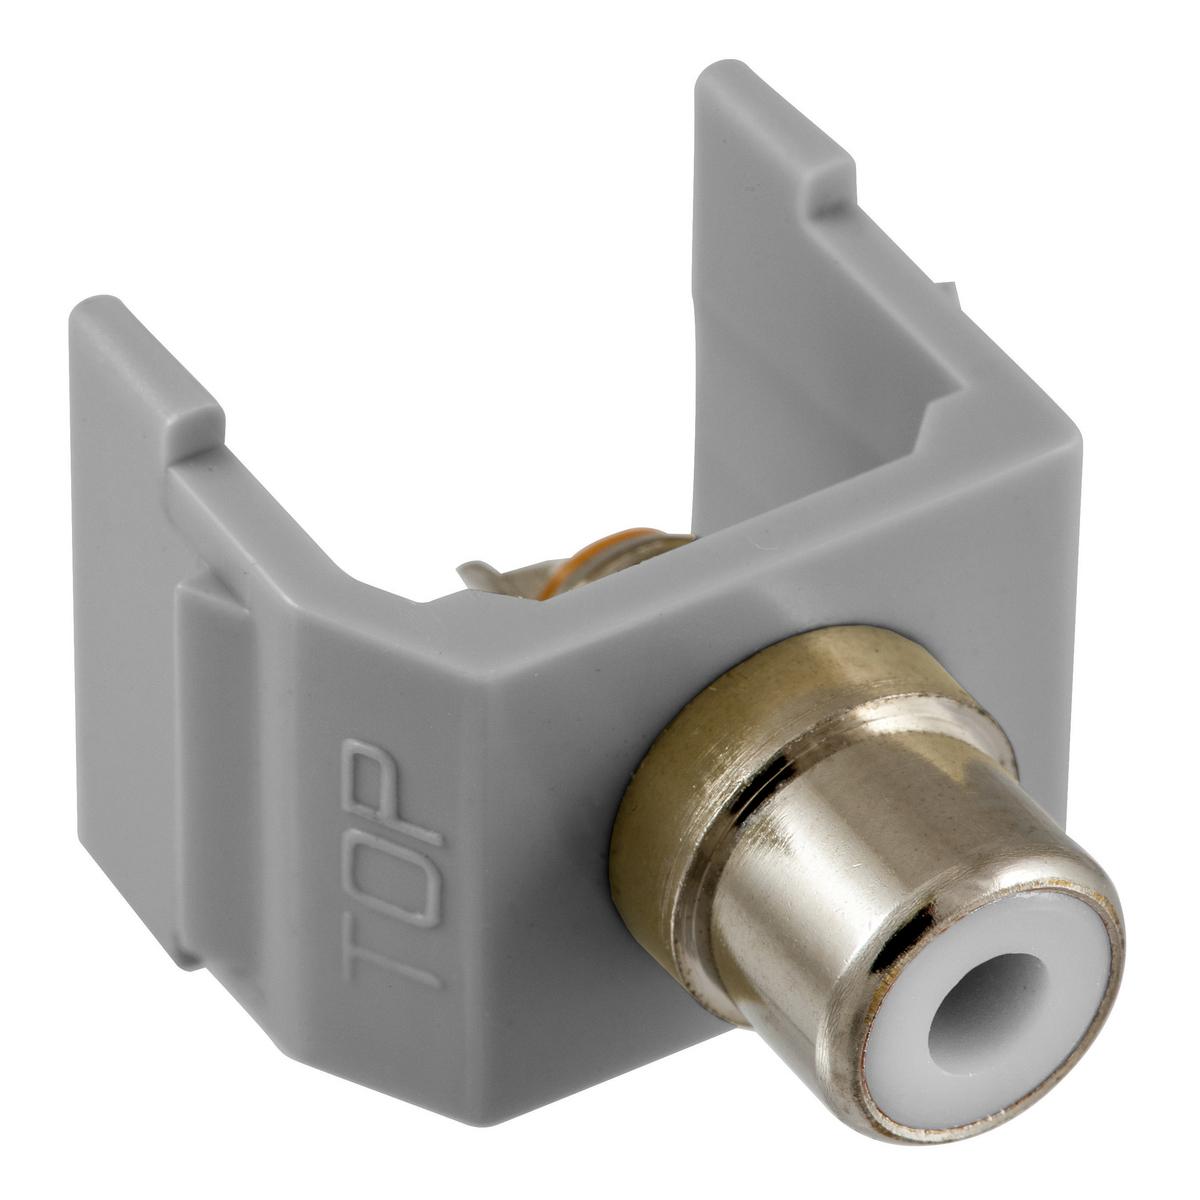 Hubbell SFRCWGY RCA Connector, Solder Termination, White Insulator, Gray Housing  ; Standard Product